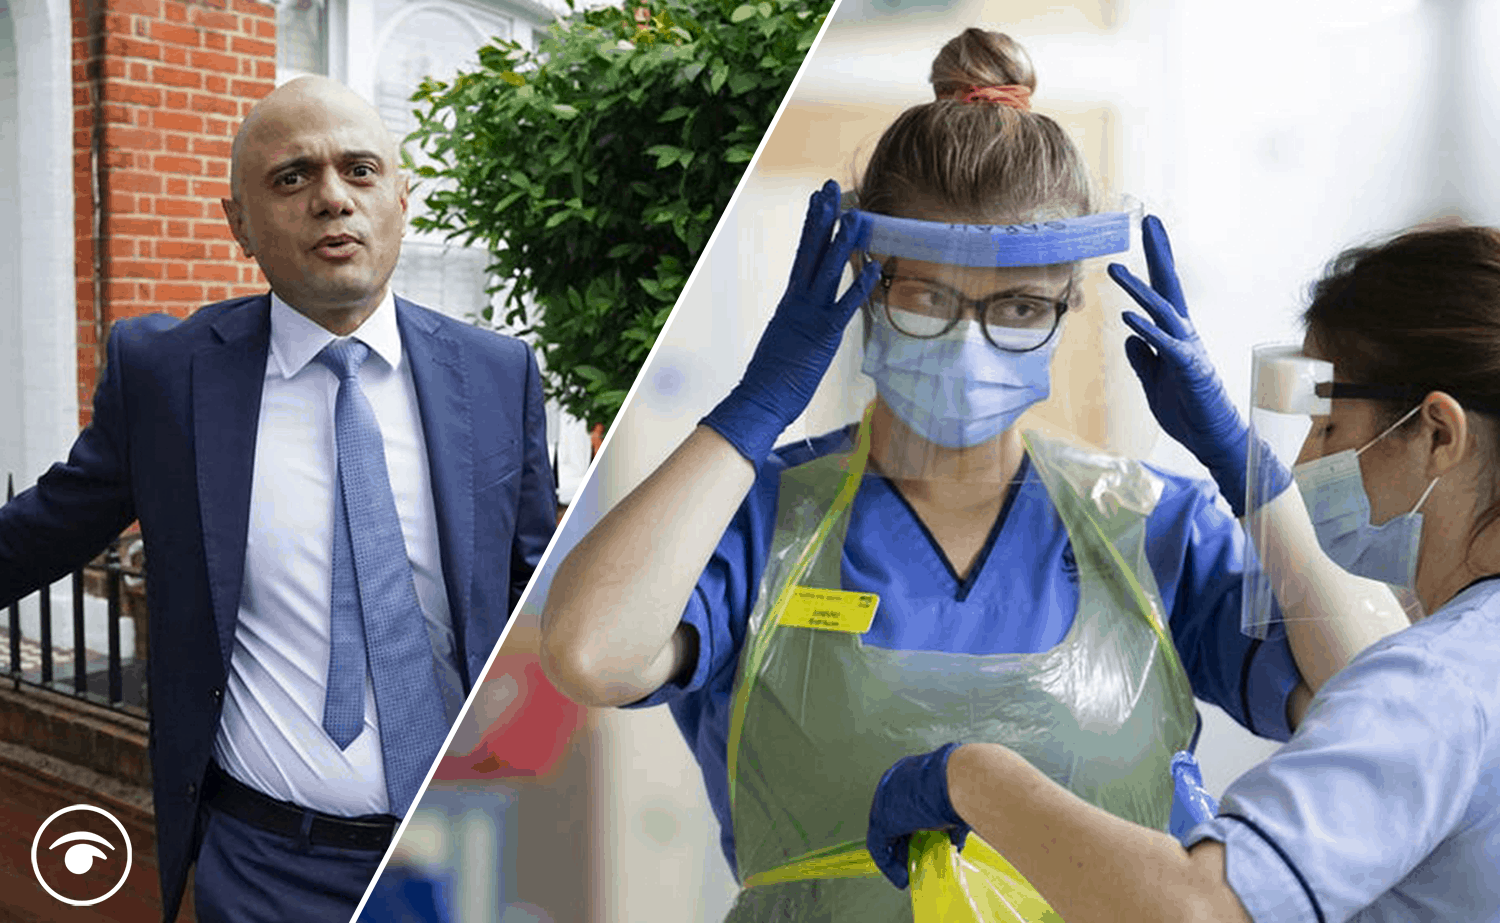 Sajid Javid slammed for claiming he was off to open one of new 48 hospitals